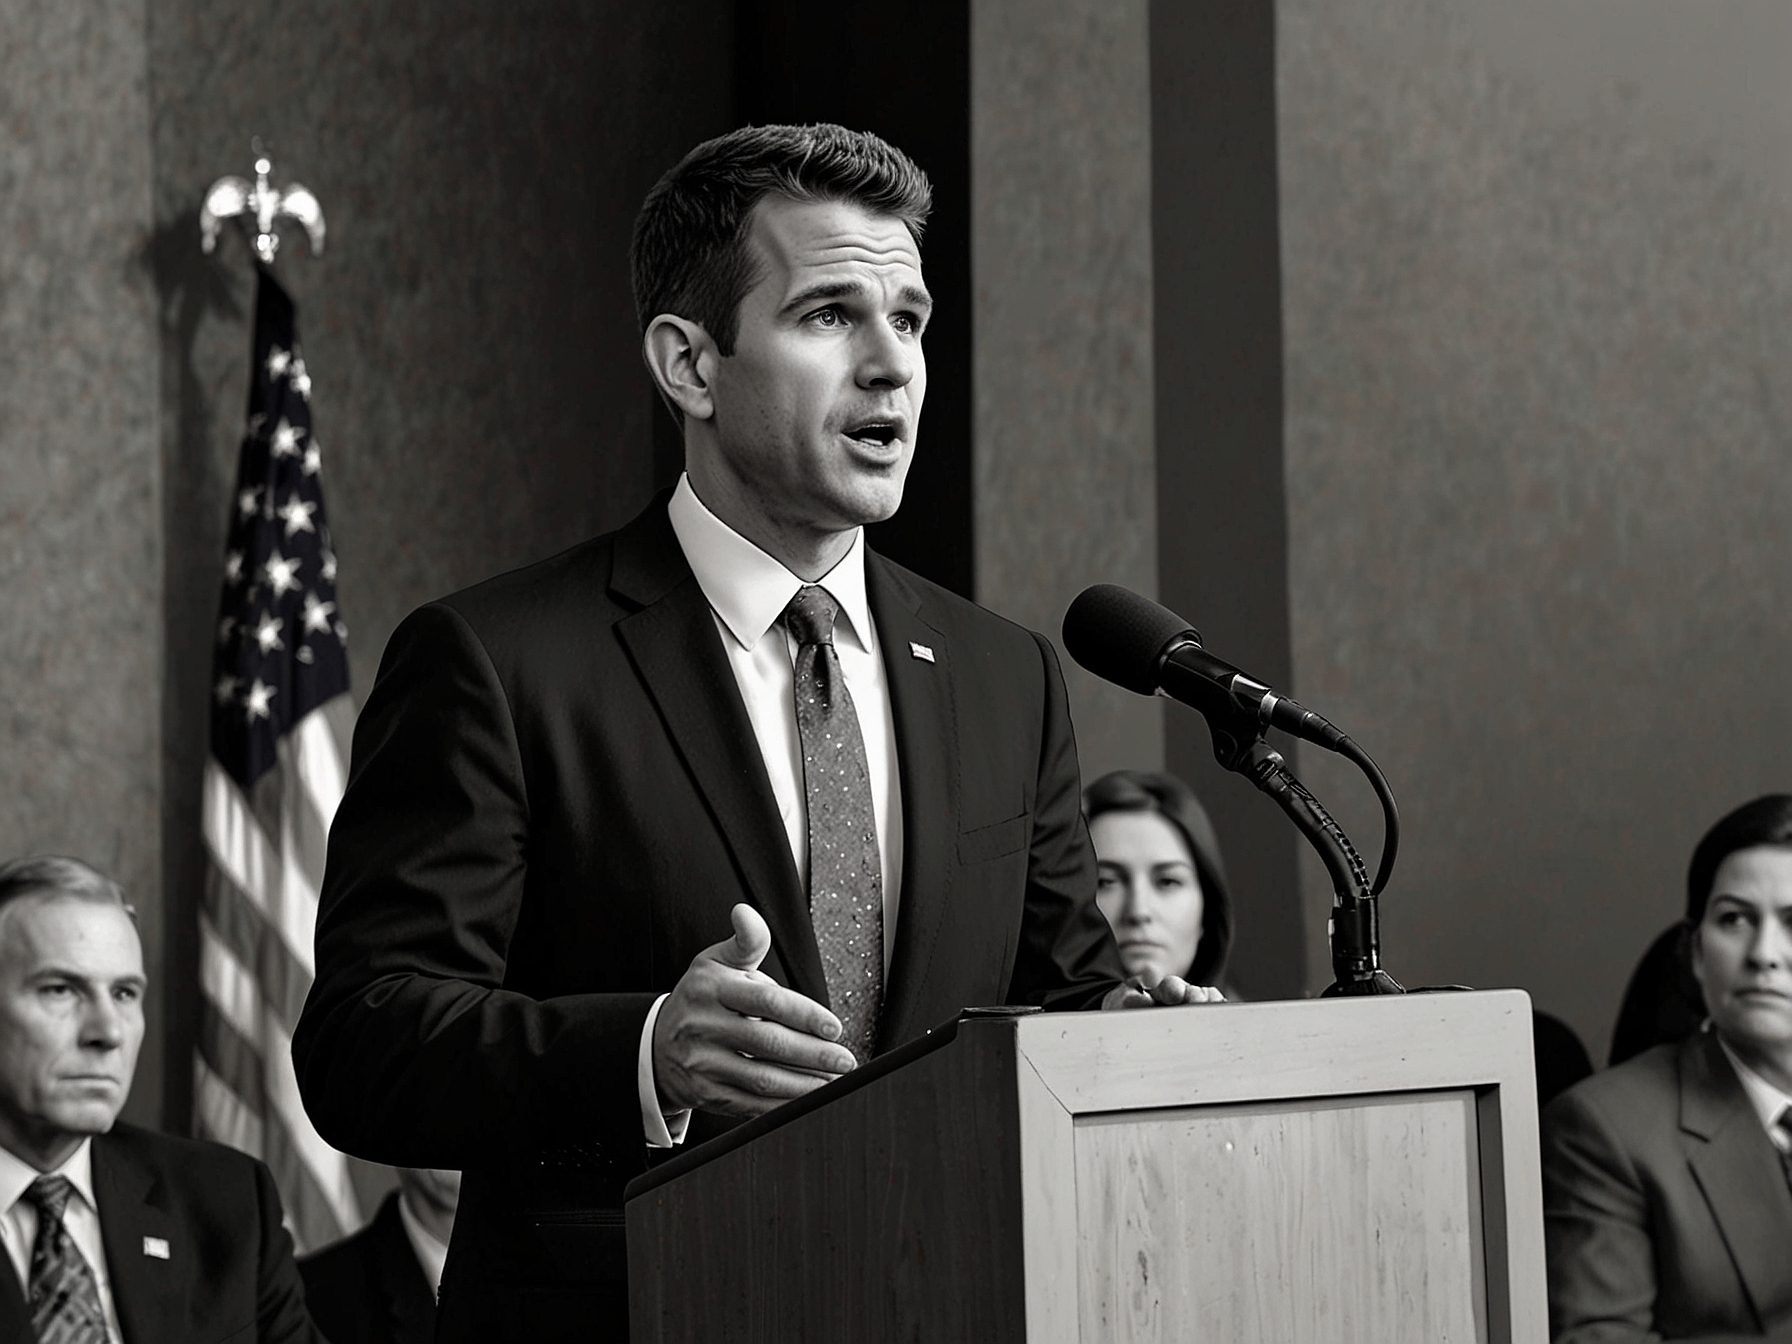 Image of Adam Kinzinger, former Republican Congressman, speaking at a conference. His endorsement of President Joe Biden signifies a notable shift in political alliances and growing discontent with Donald Trump.